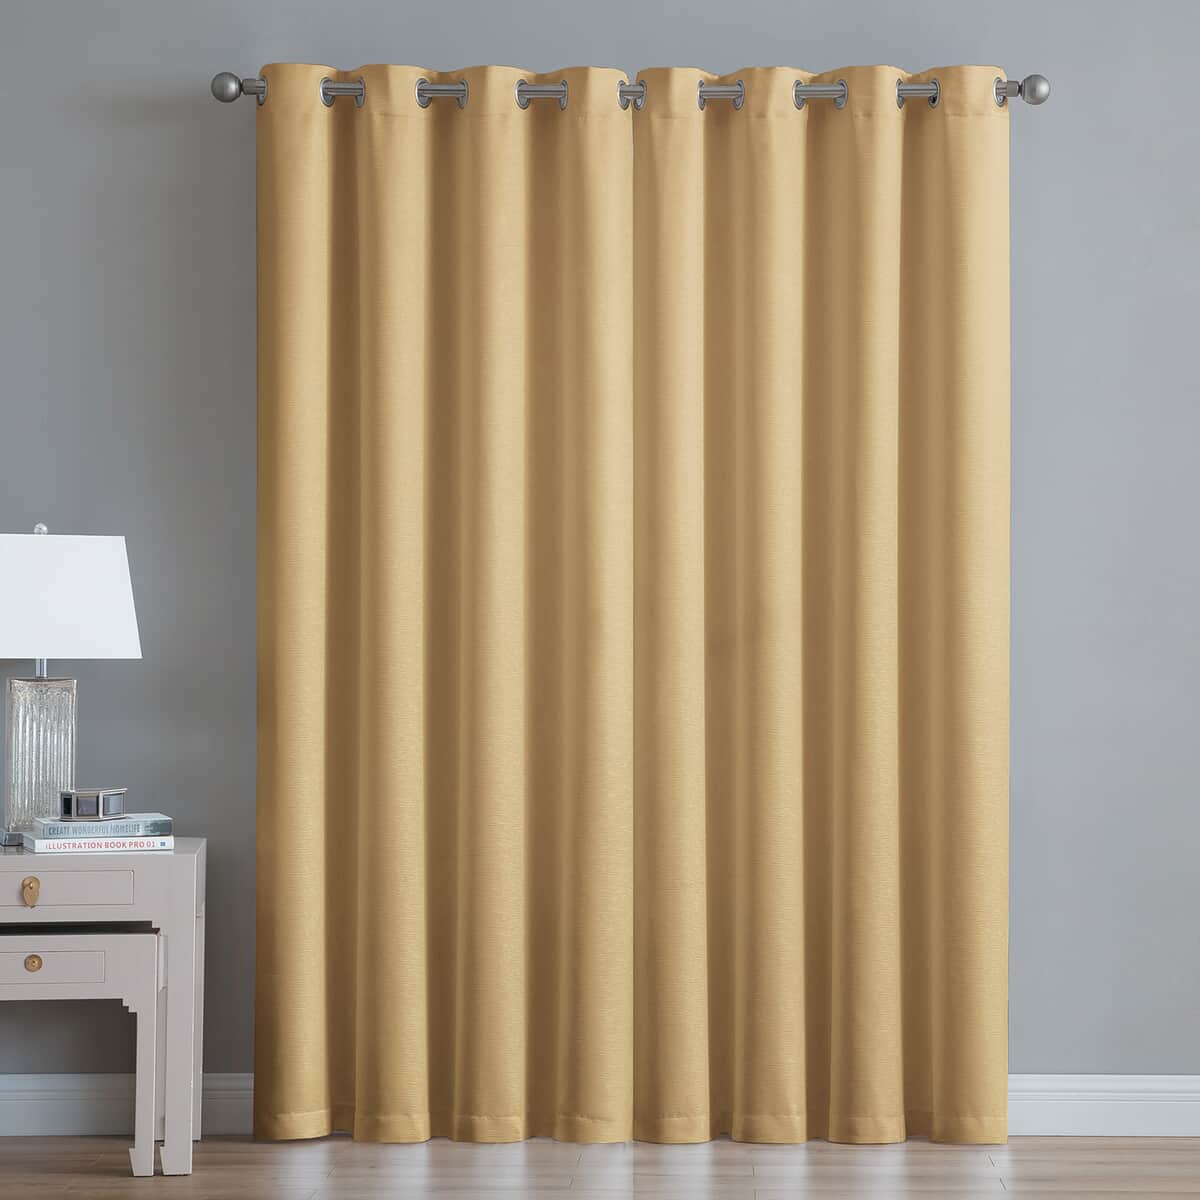 VCNY Single Panel Blackout Curtains - Gold image number 1